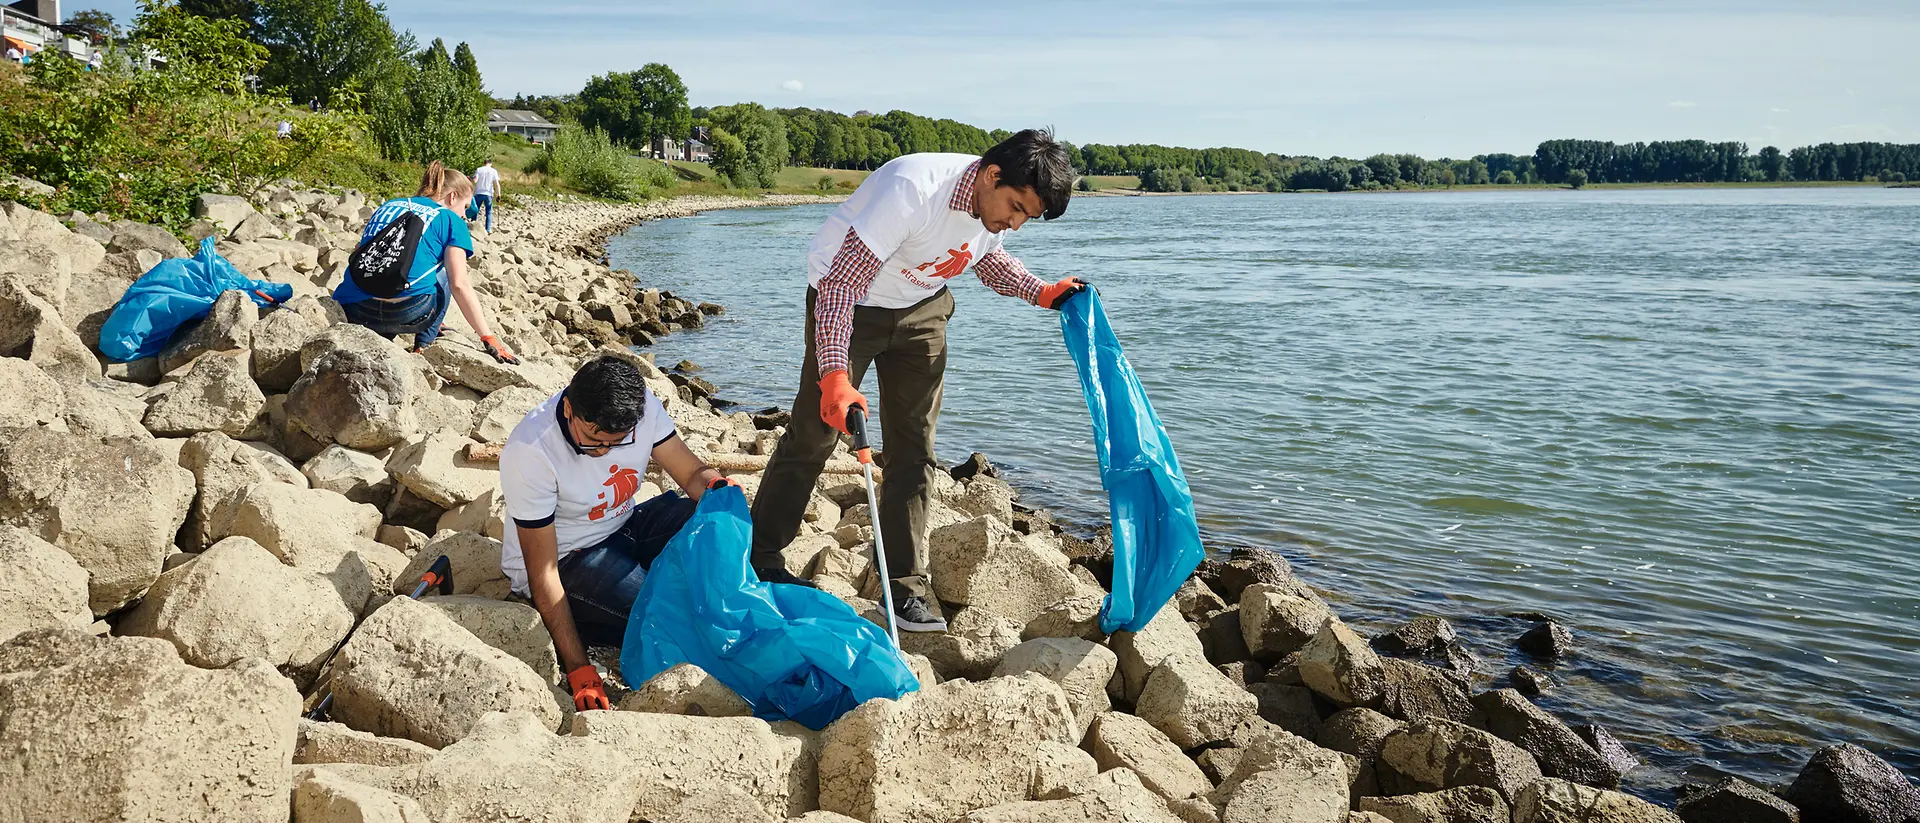 A group of volunteers collects thrash with waste pickers during a thrash collection event on a riverbank.